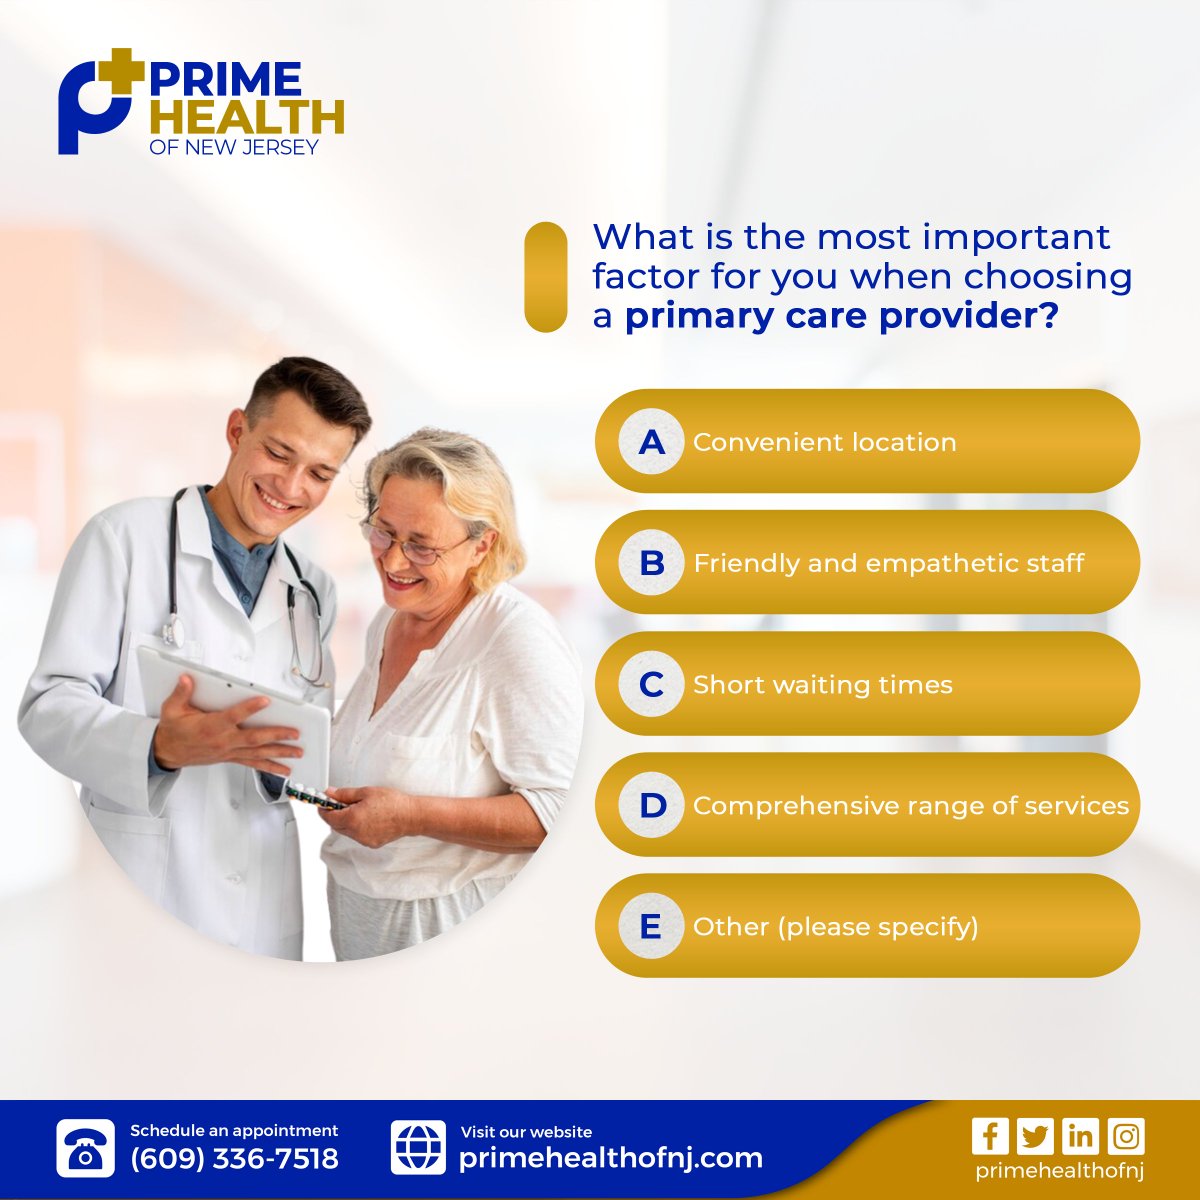 When it comes to choosing a #PrimaryCare provider, what factors matter the most to you?

Share your thoughts and help us improve primary care services!
📞 (609) 336-7518

#HealthcarePoll #PrimaryCareProvider #PatientOpinions #PrimeHealthofNJ #EastWindsor